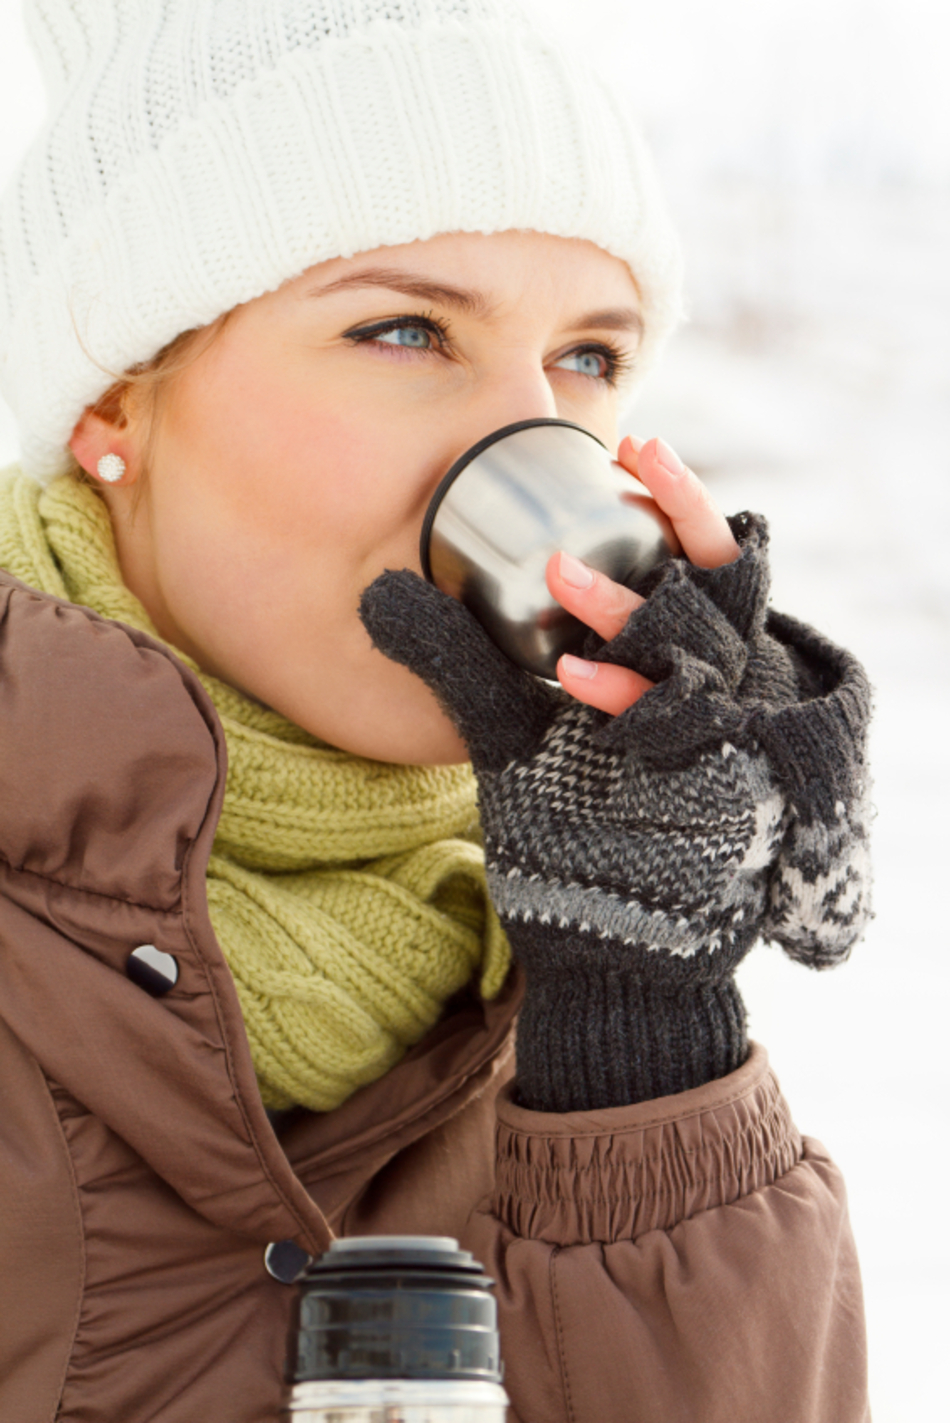 Are You Drinking Enough Water in the Winter?